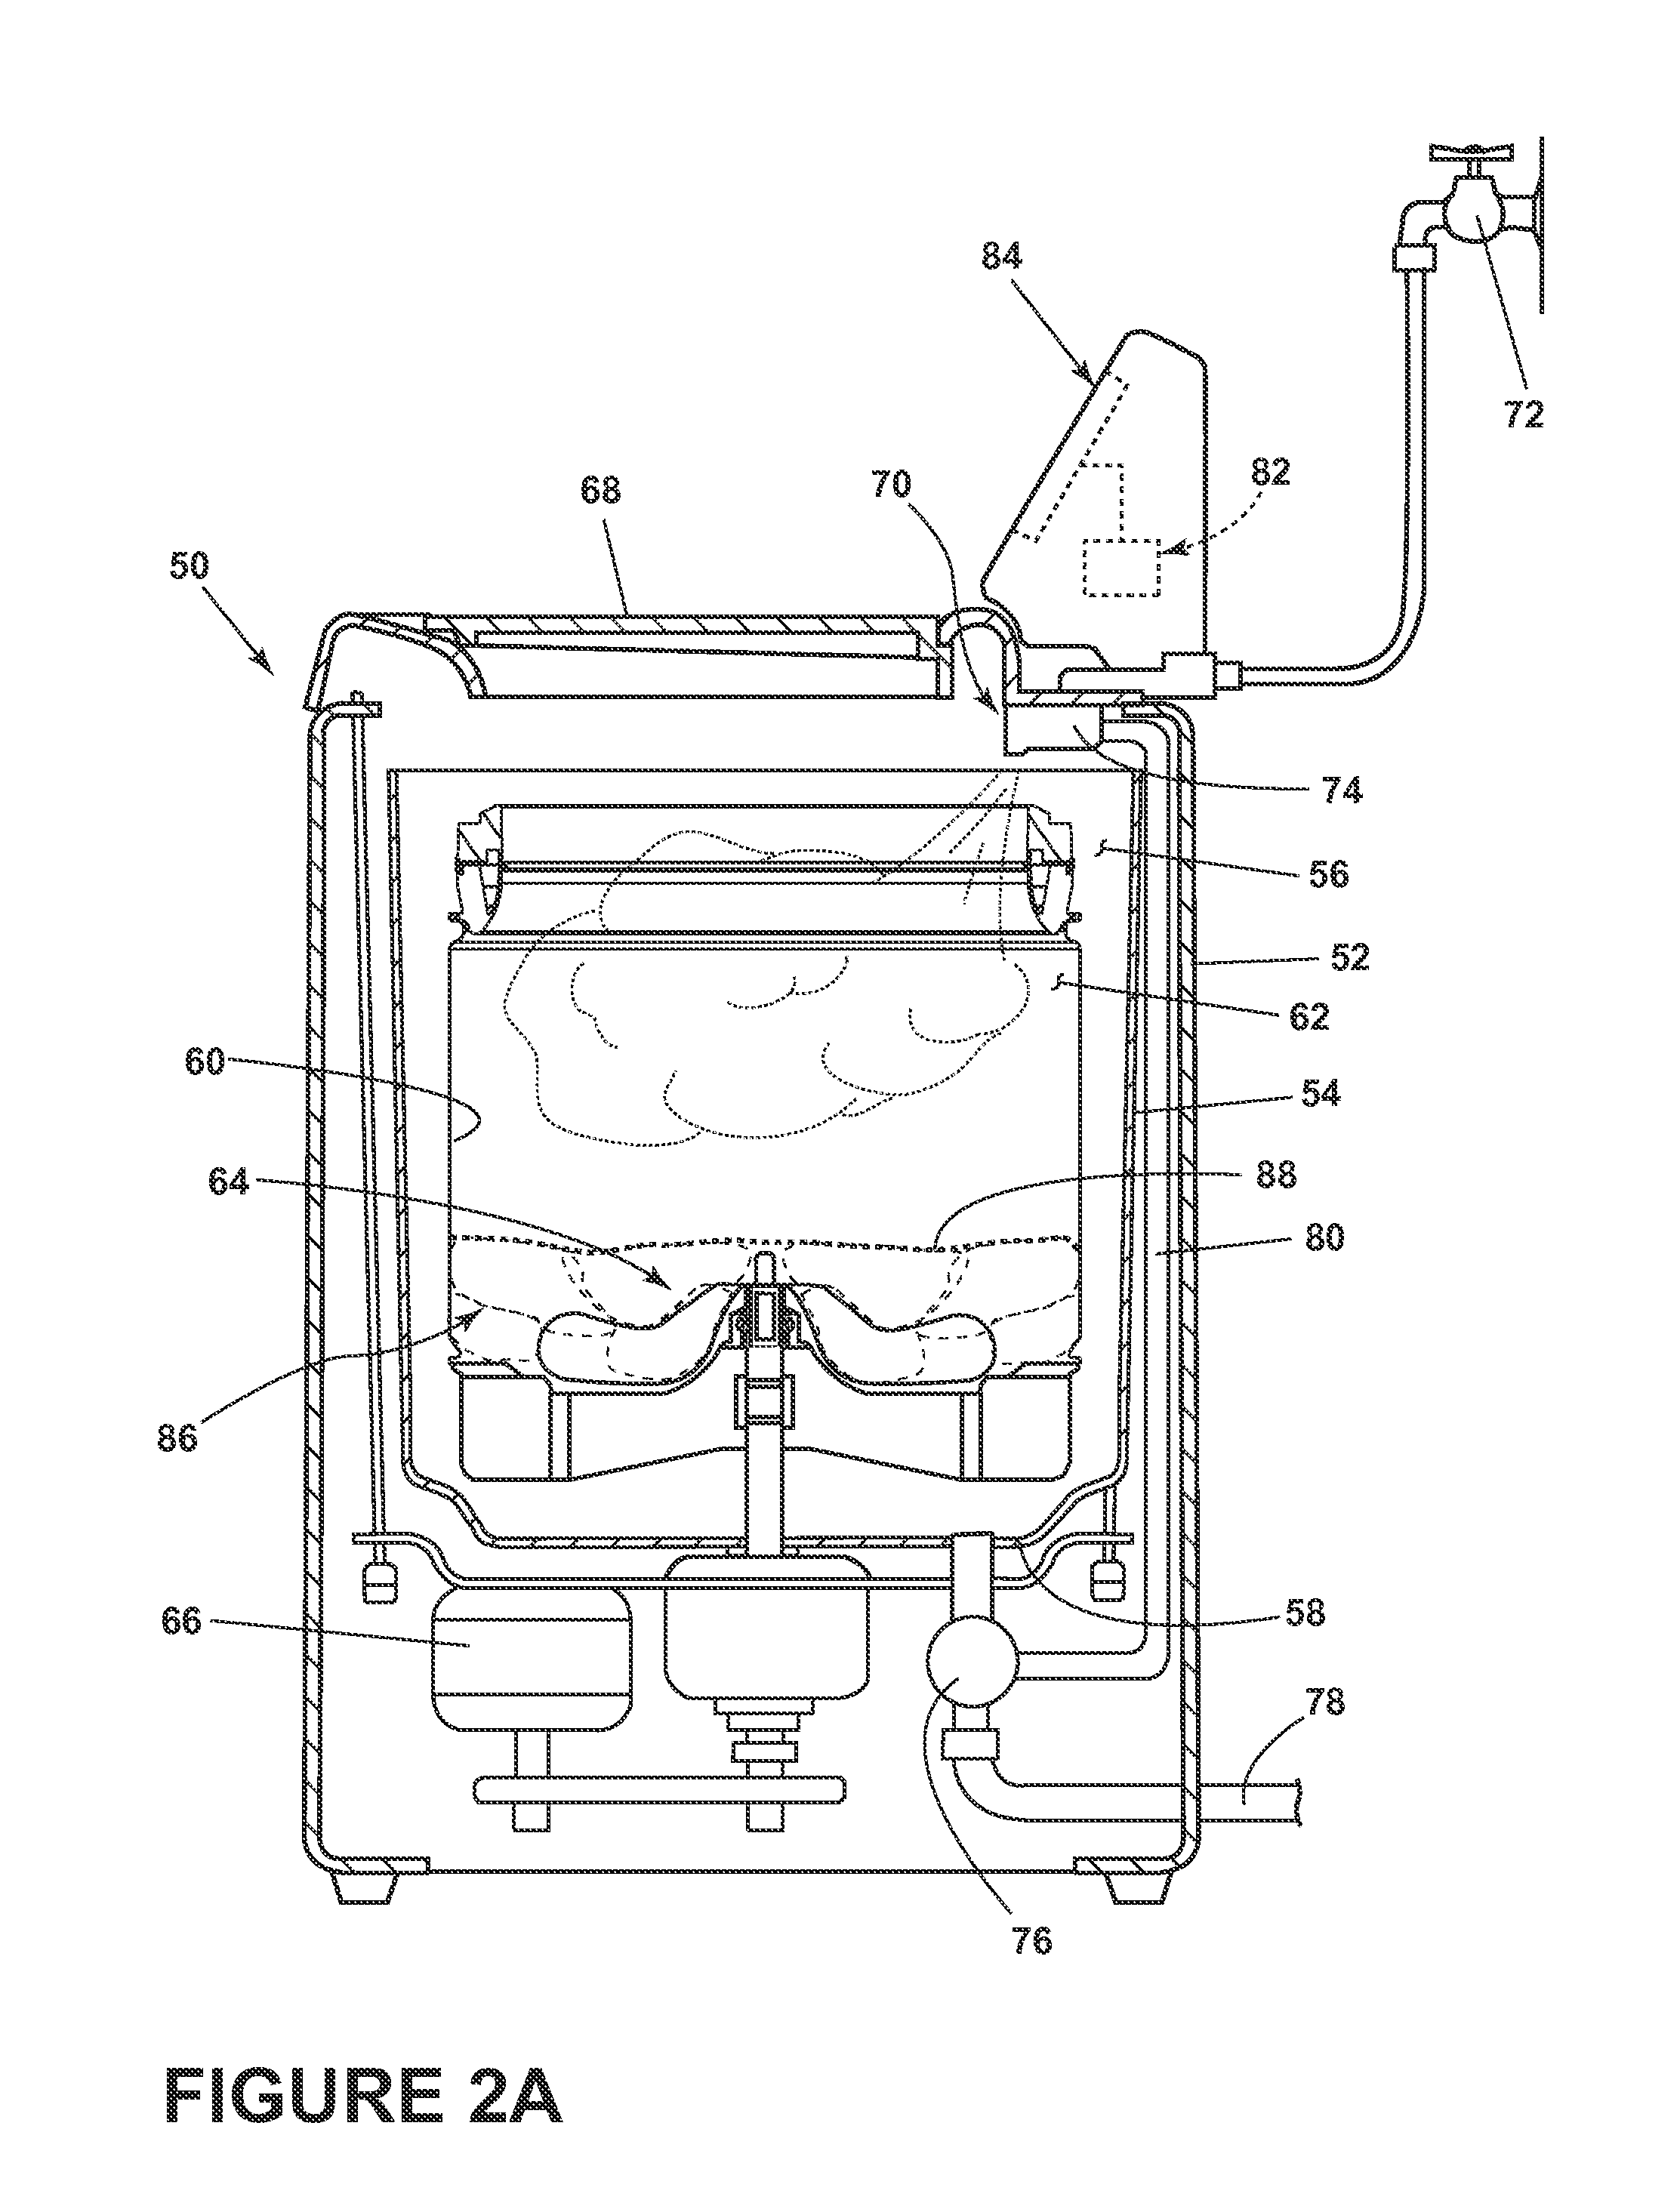 Methods and compositions for treating laundry items